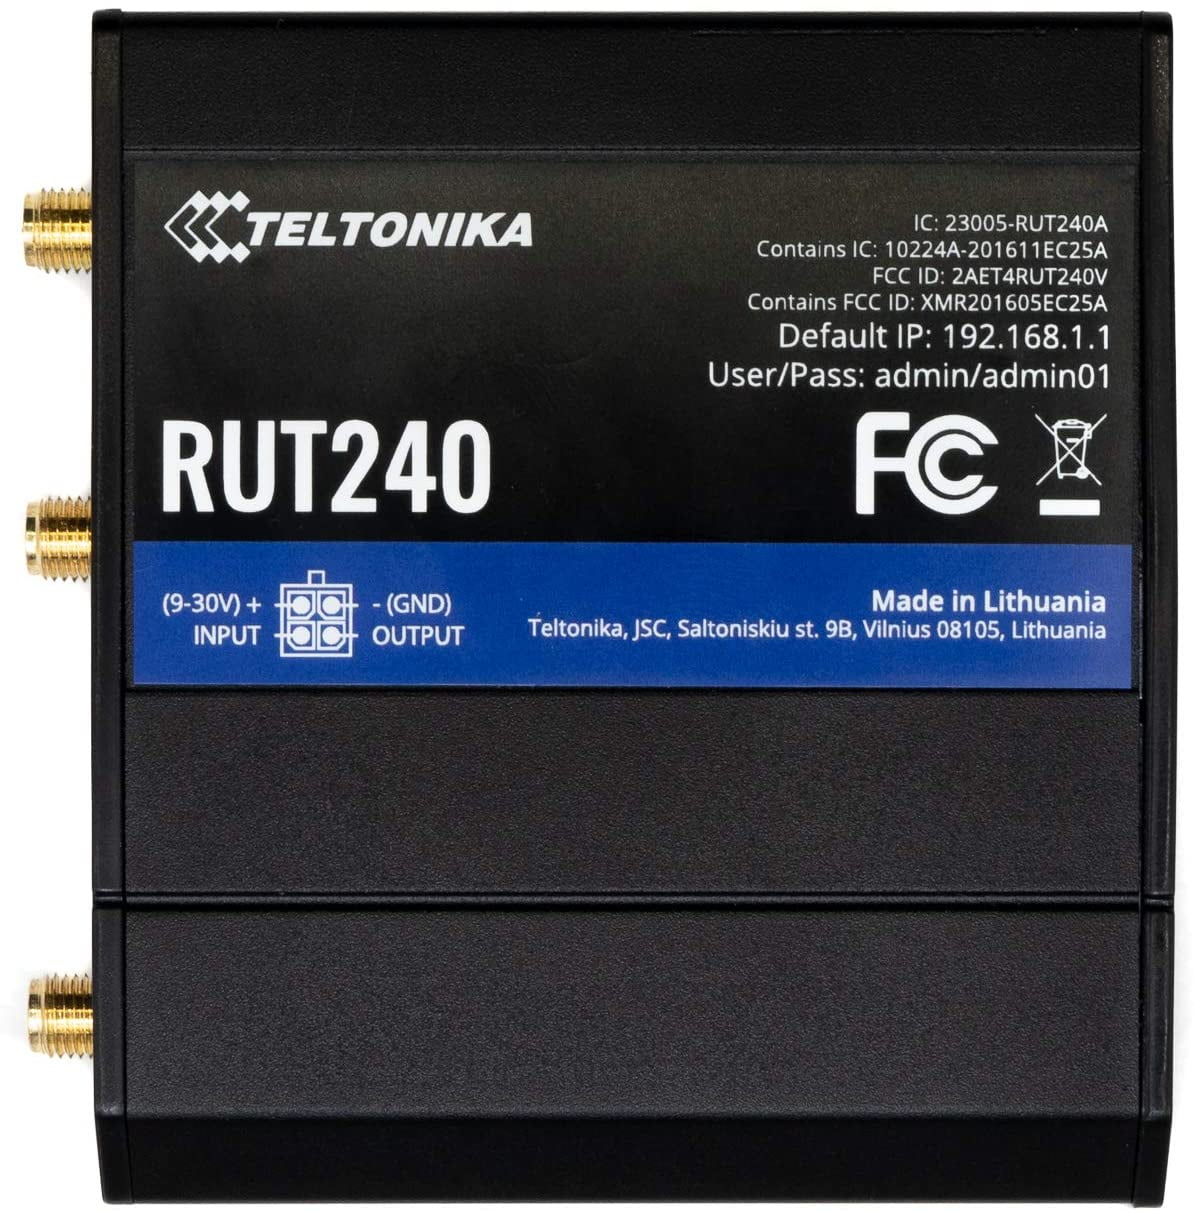 Teltonika RUT240 4G /LTE & WiFi Cellular Router for AT&T, T-Mobile, Rogers,  Telus, and Bell - USA/CAN Except Verizon 